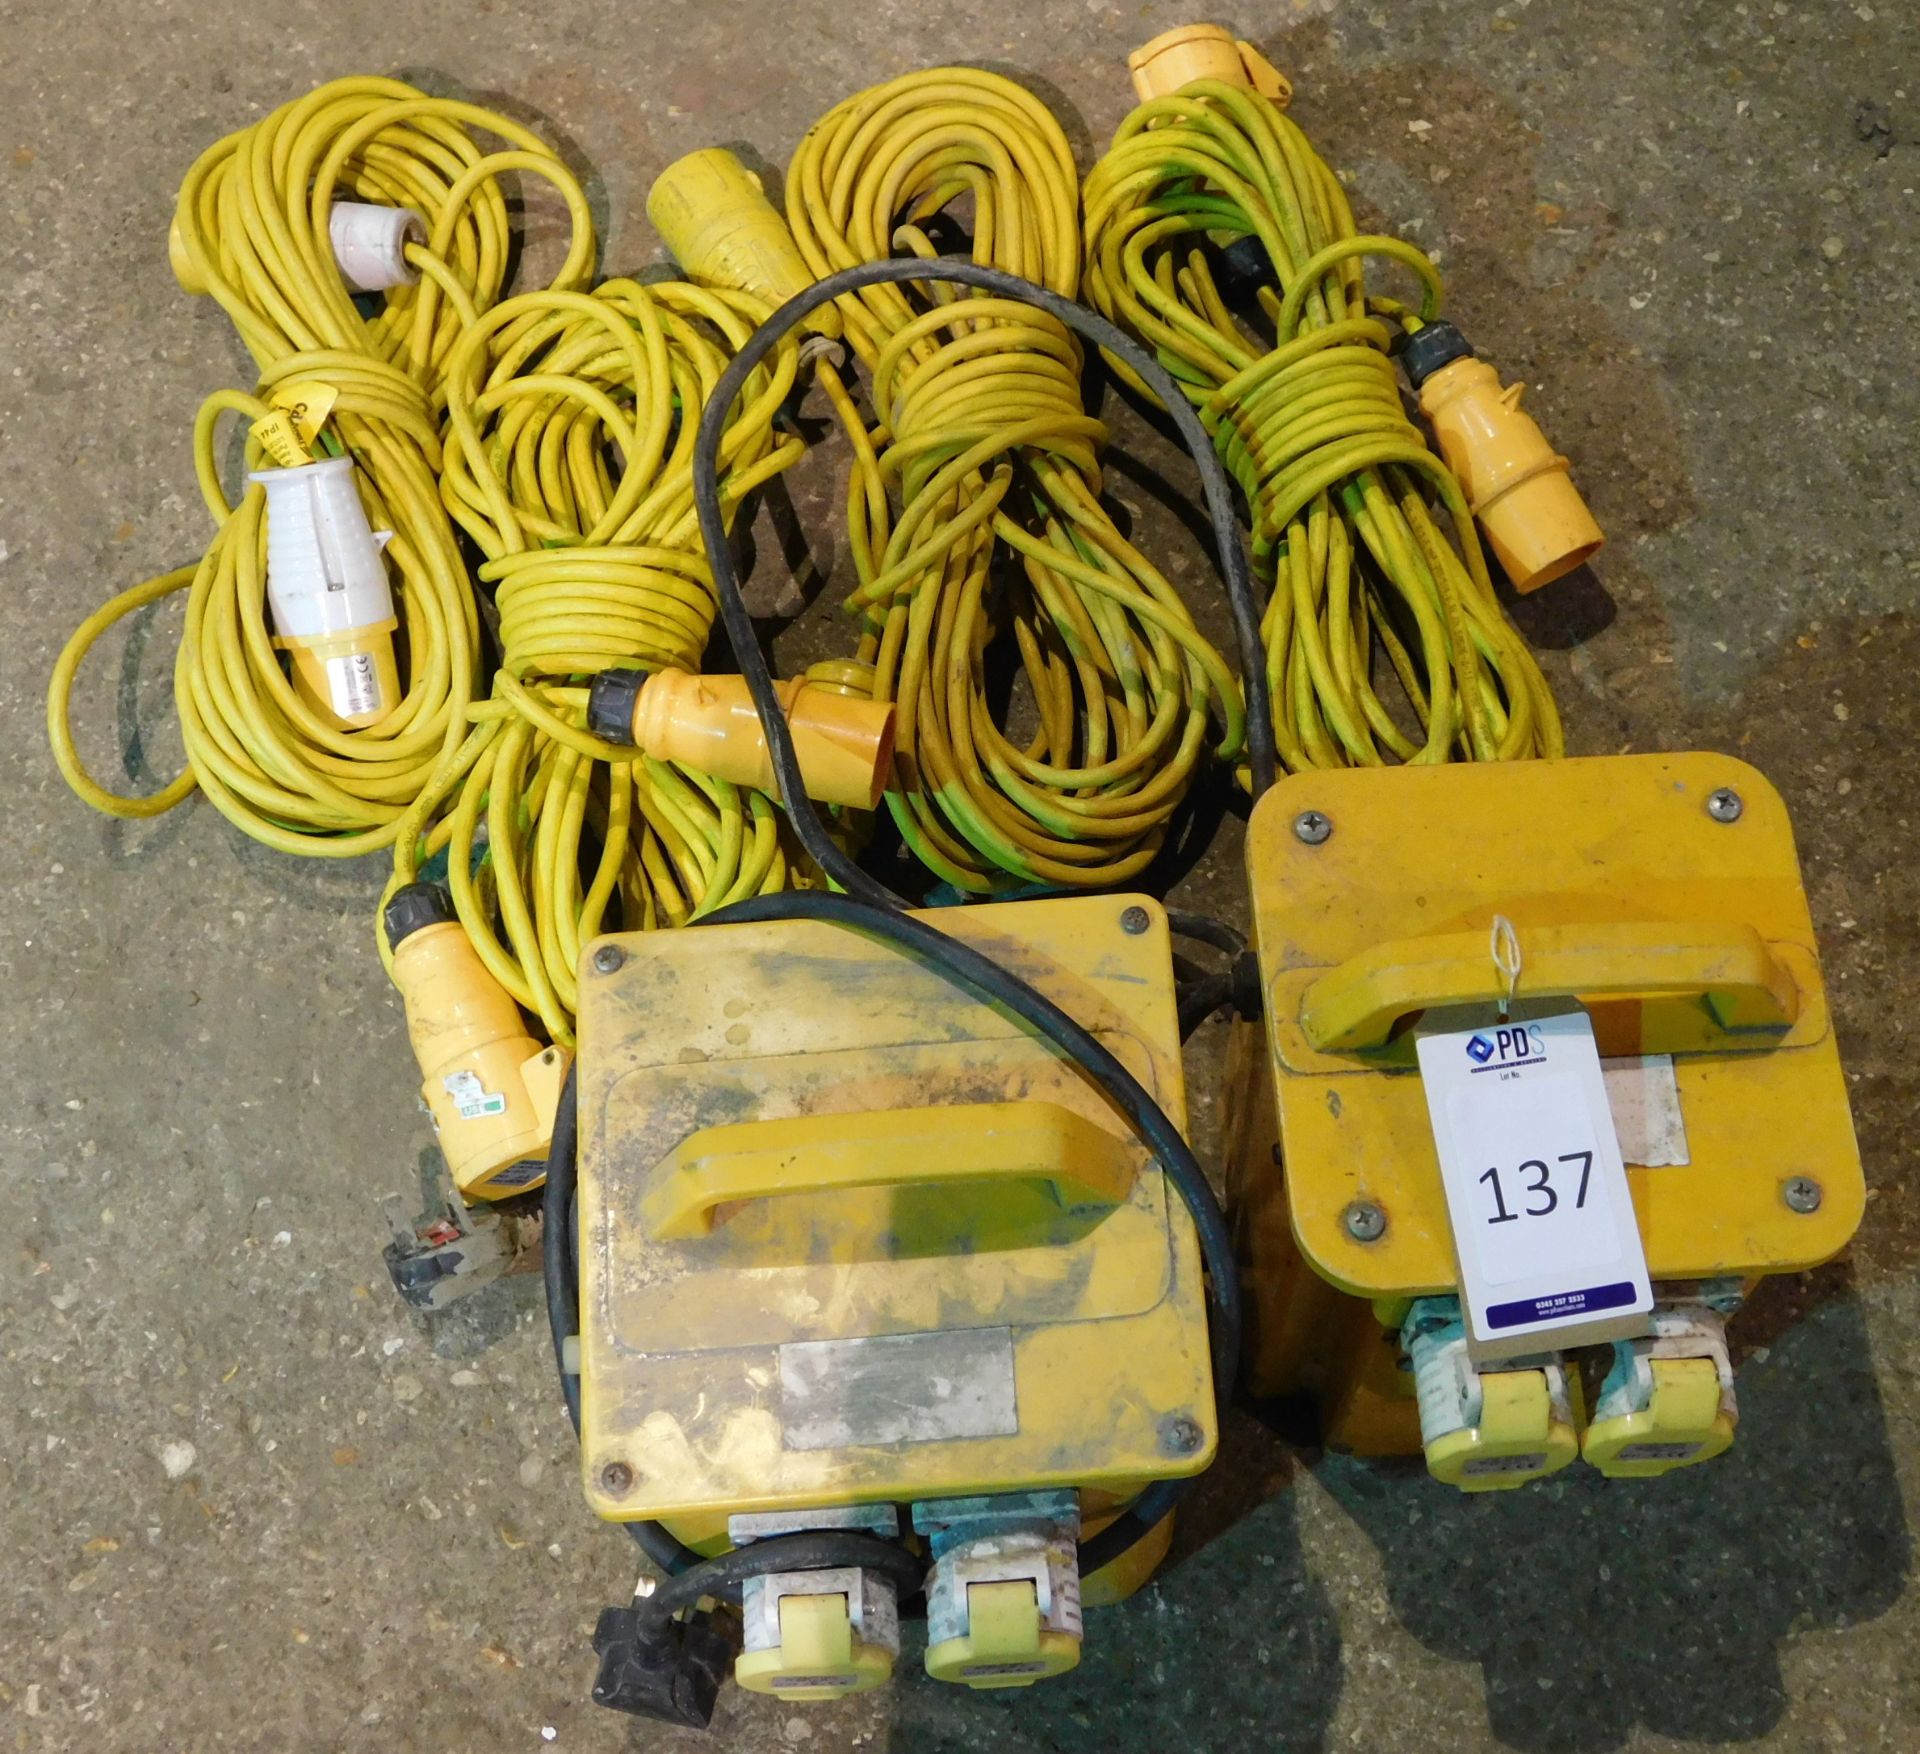 2 Power Tool Transformers, 3300W (110v) with 4 Lengths 110v Cables (Location: Finedon - Please Refer